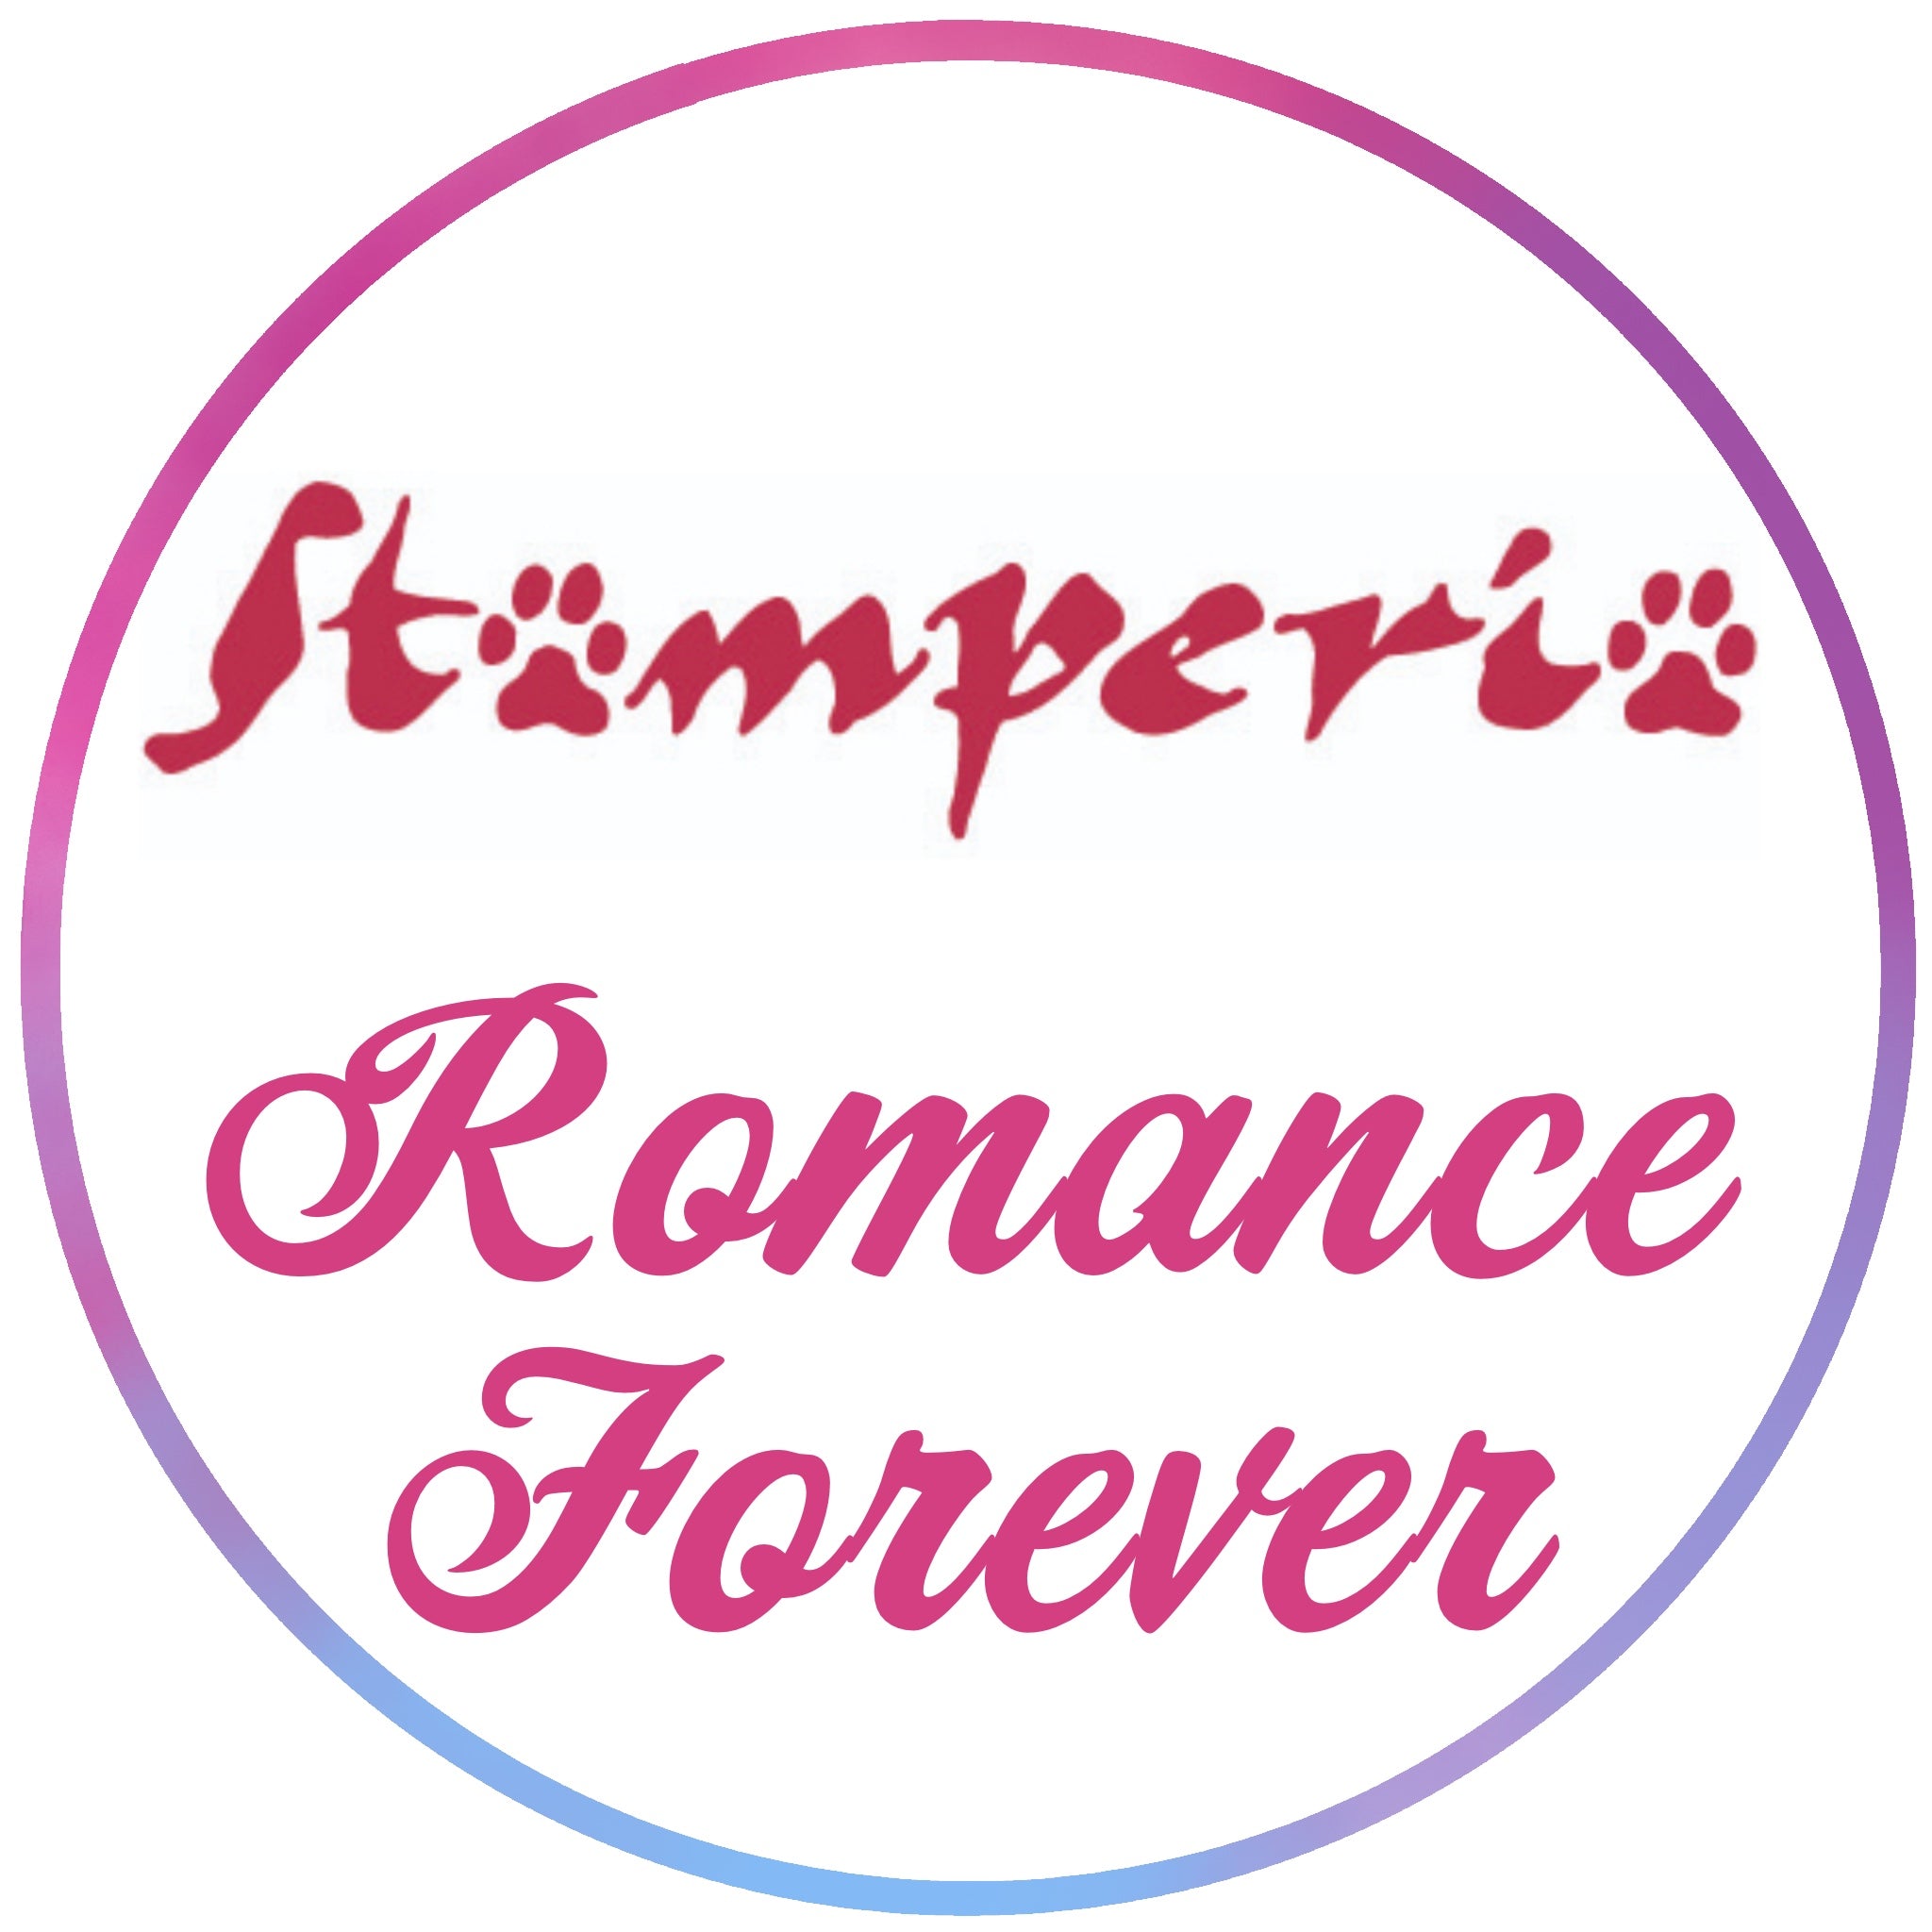 BUY IT ALL: Stamperia Romance Forever Collection